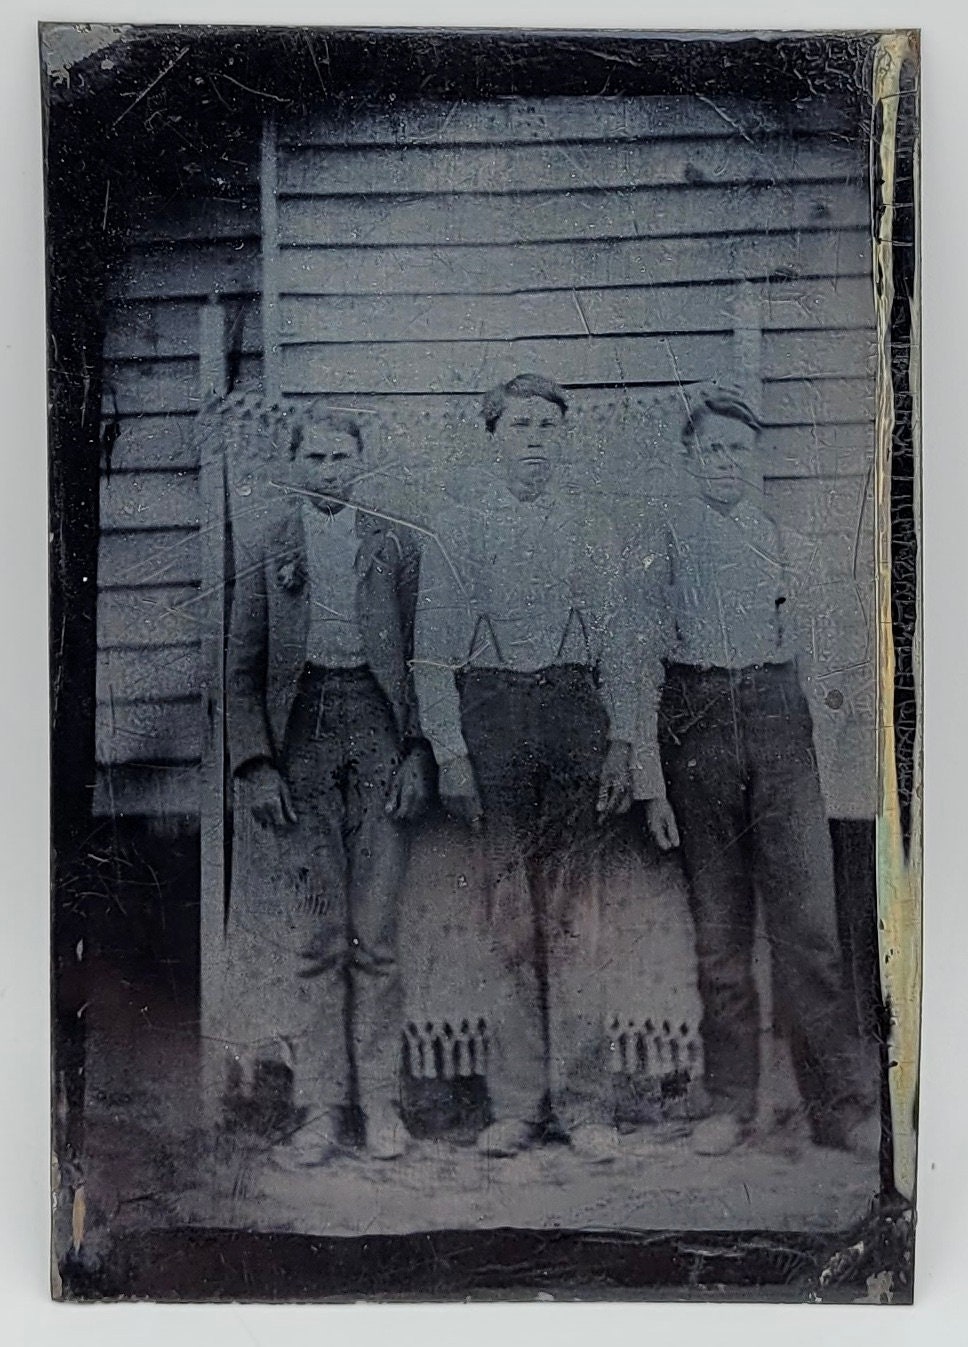 Three Young Guys~Outdoor Tintype Photo~Makeshift Backdrop~Silvery & Worn a/s